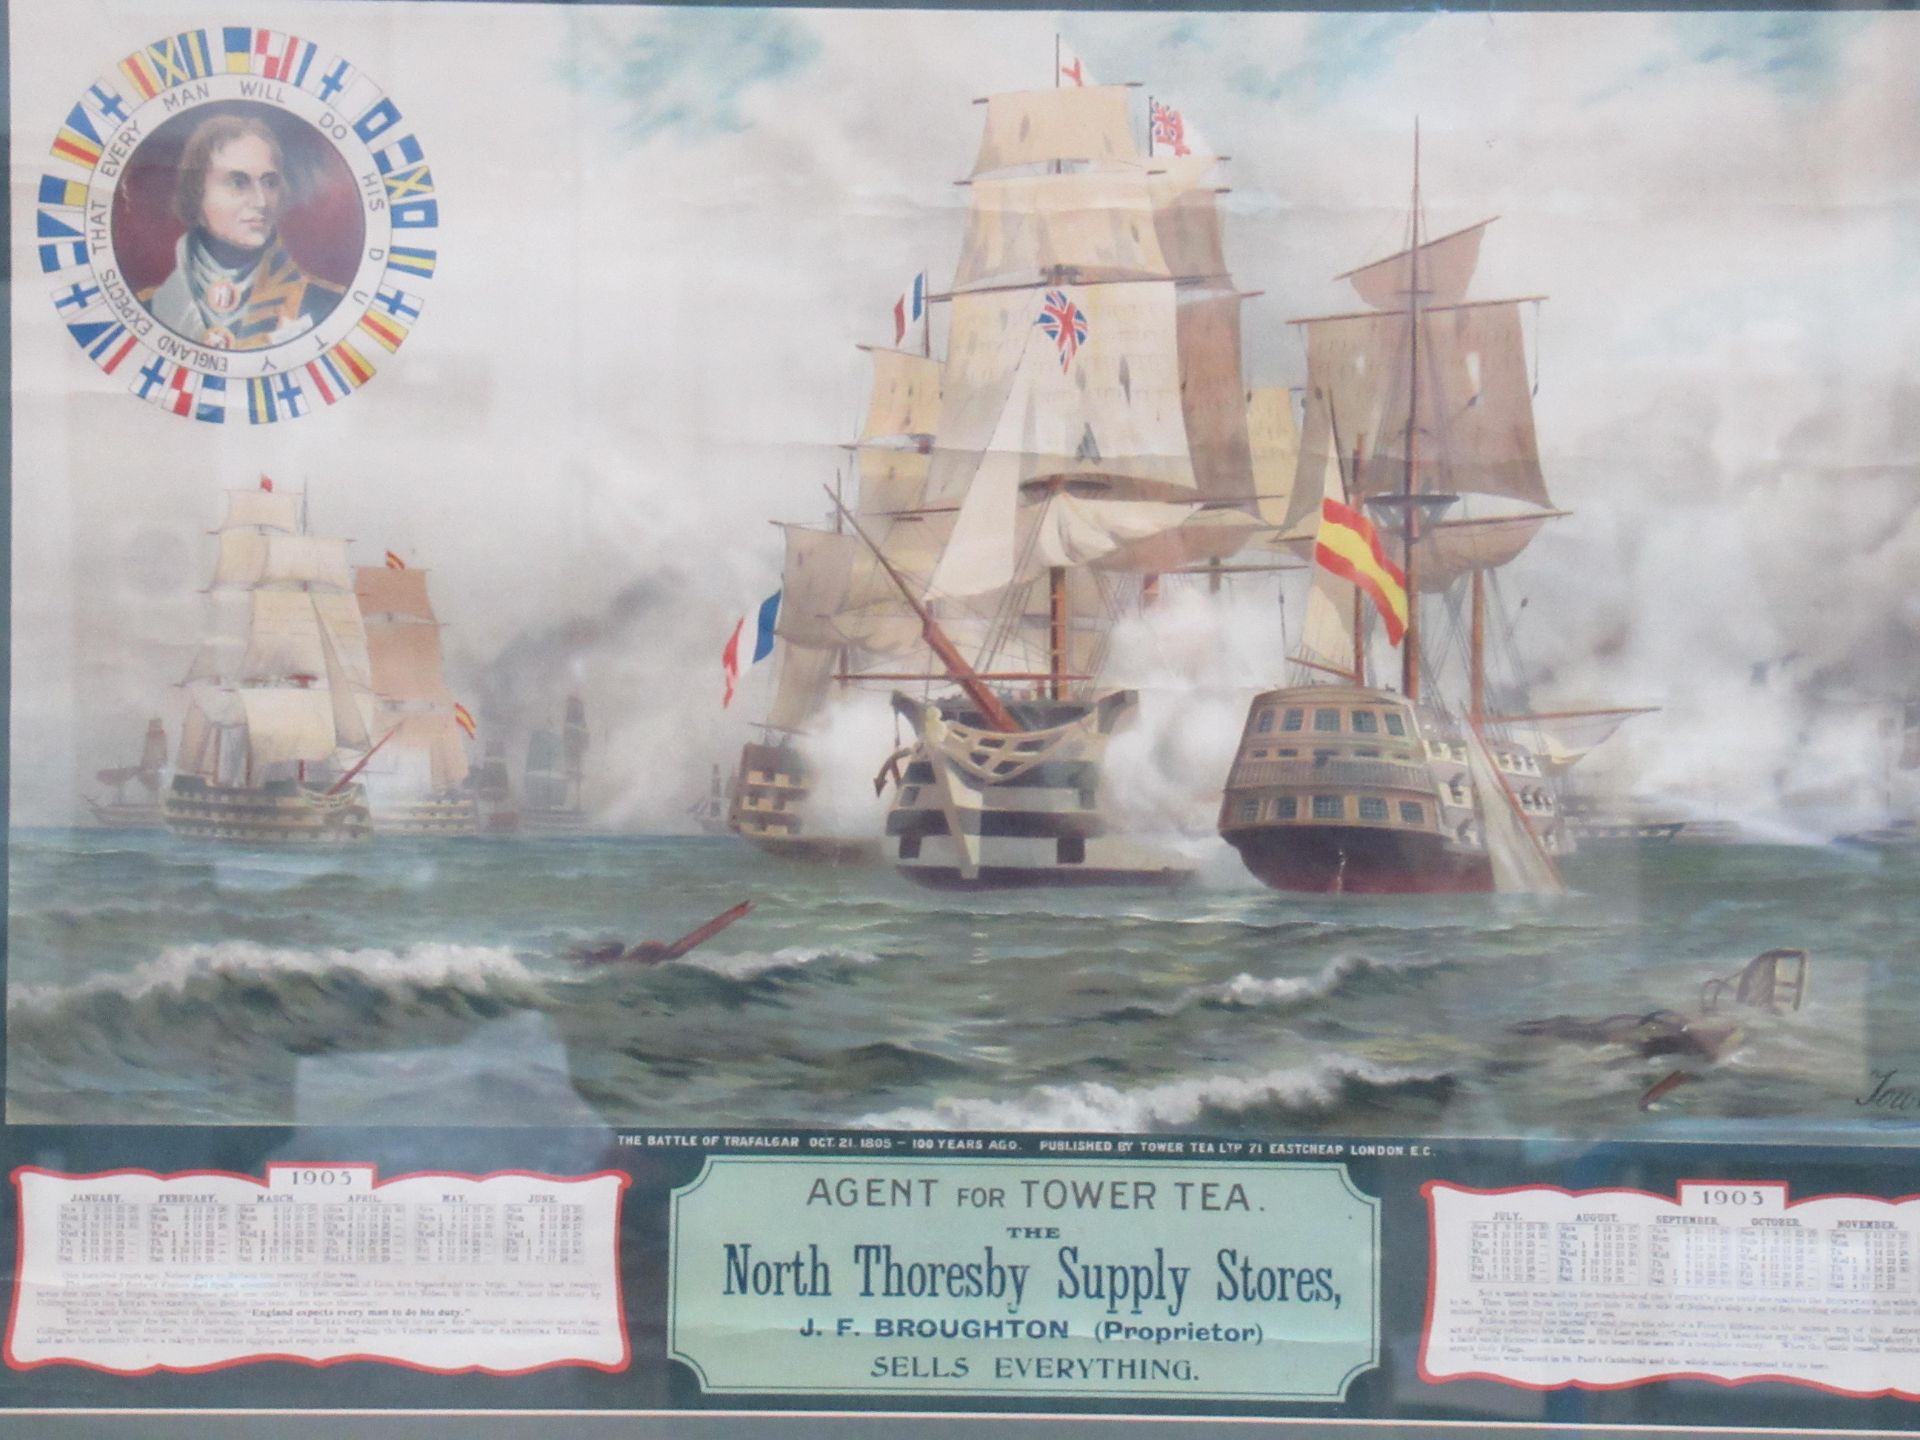 North Thorsby Supply Stores, J.F. Broughton 'The Battle of Trafalgar Oct 21 1805' 1905 calendar in f - Image 2 of 5